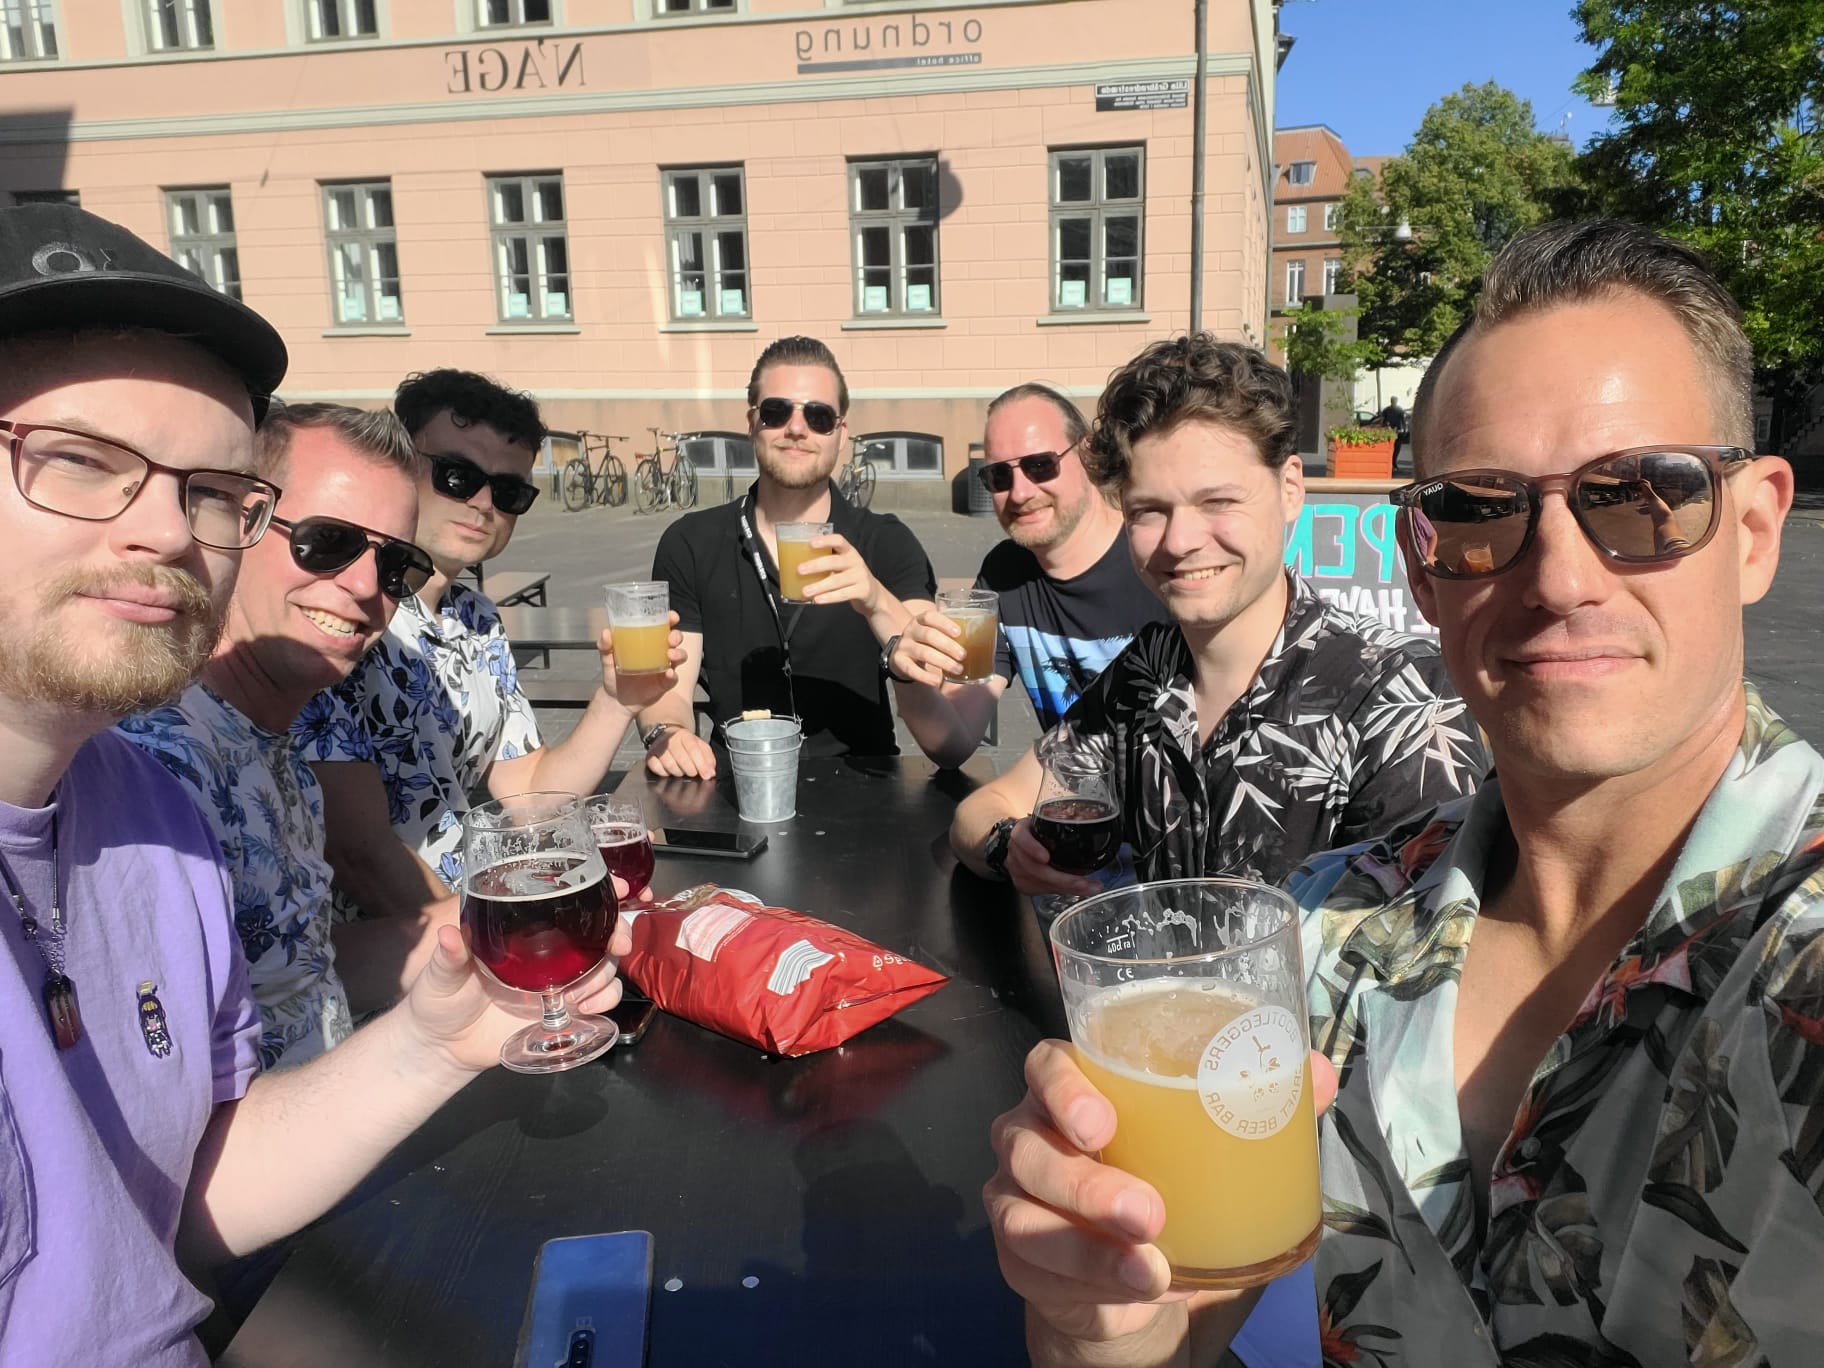 Attachment 4. Enjoying a cold beer on a warm summer day with my colleagues in Odense